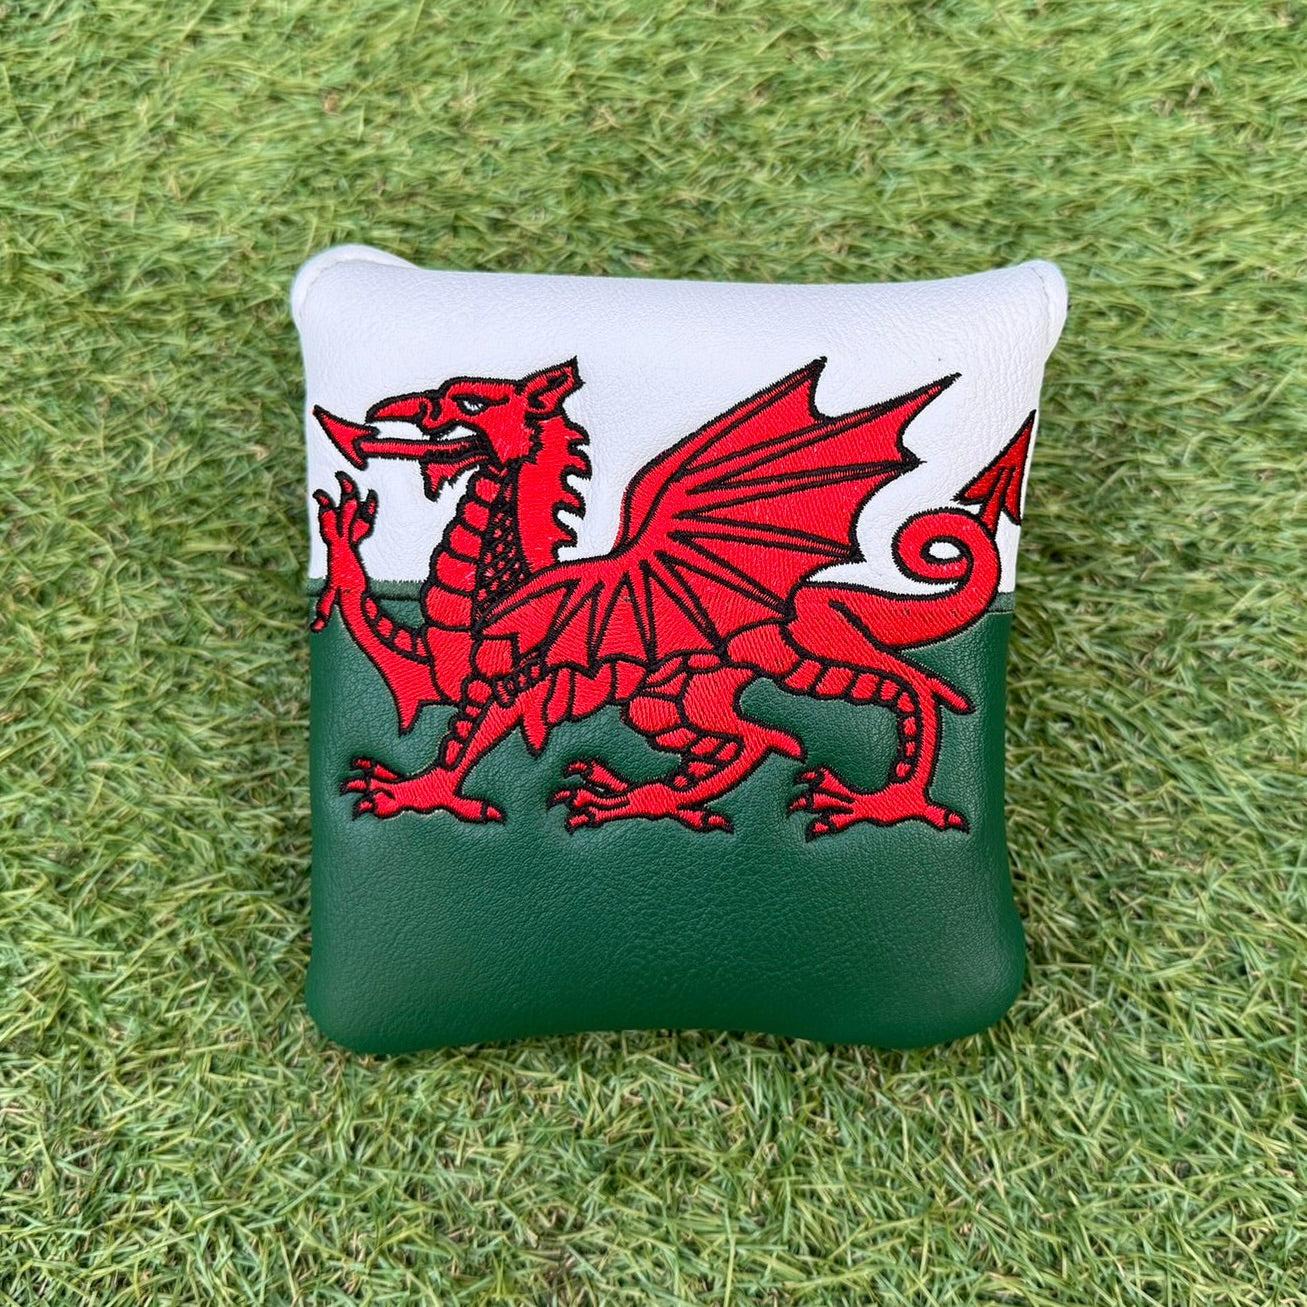 Wales Golf Mallet Headcover